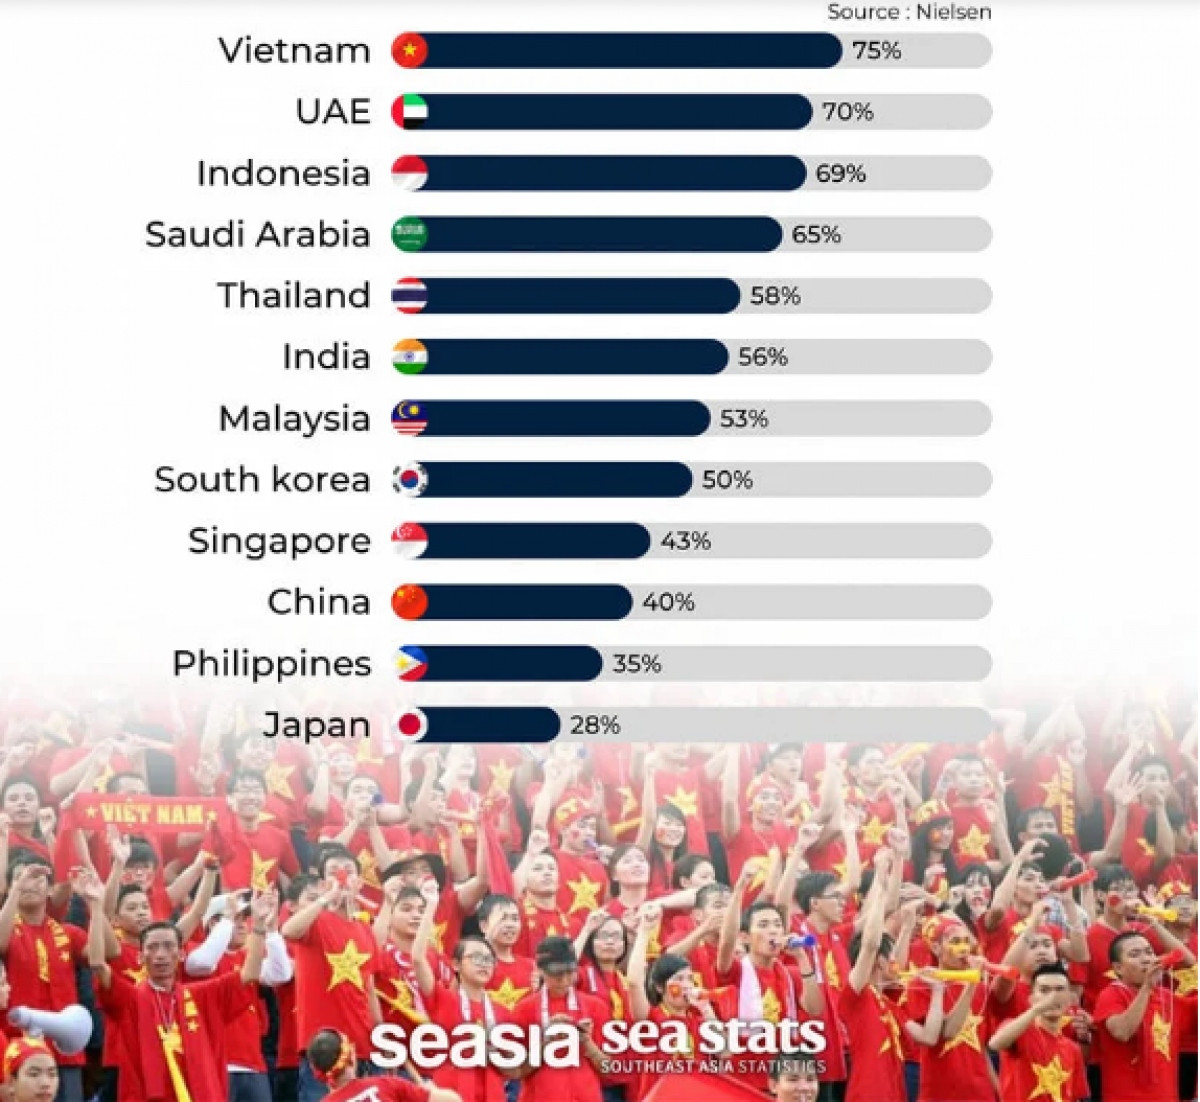 vietnam has highest percentage of football fans in asia nielsen picture 1